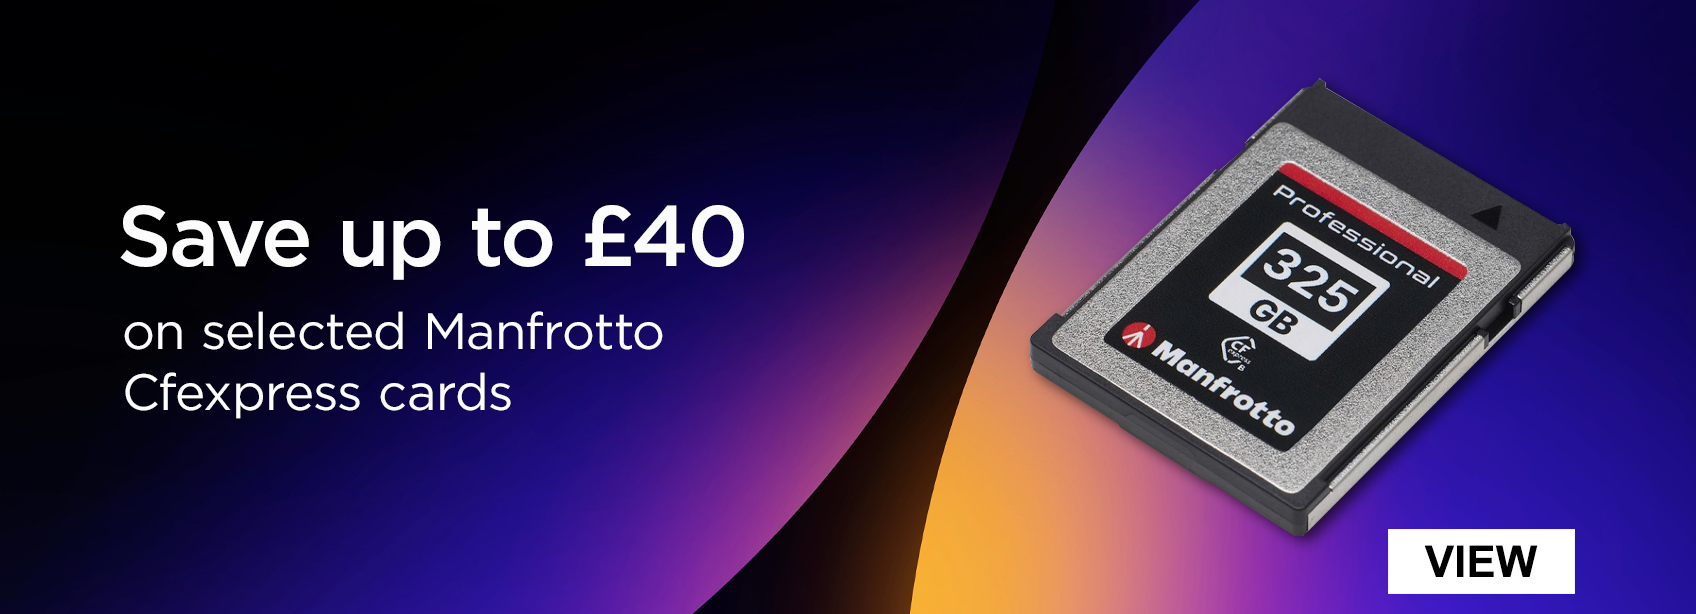 Save up to £40 on selected Manfrotto CFexpress cards